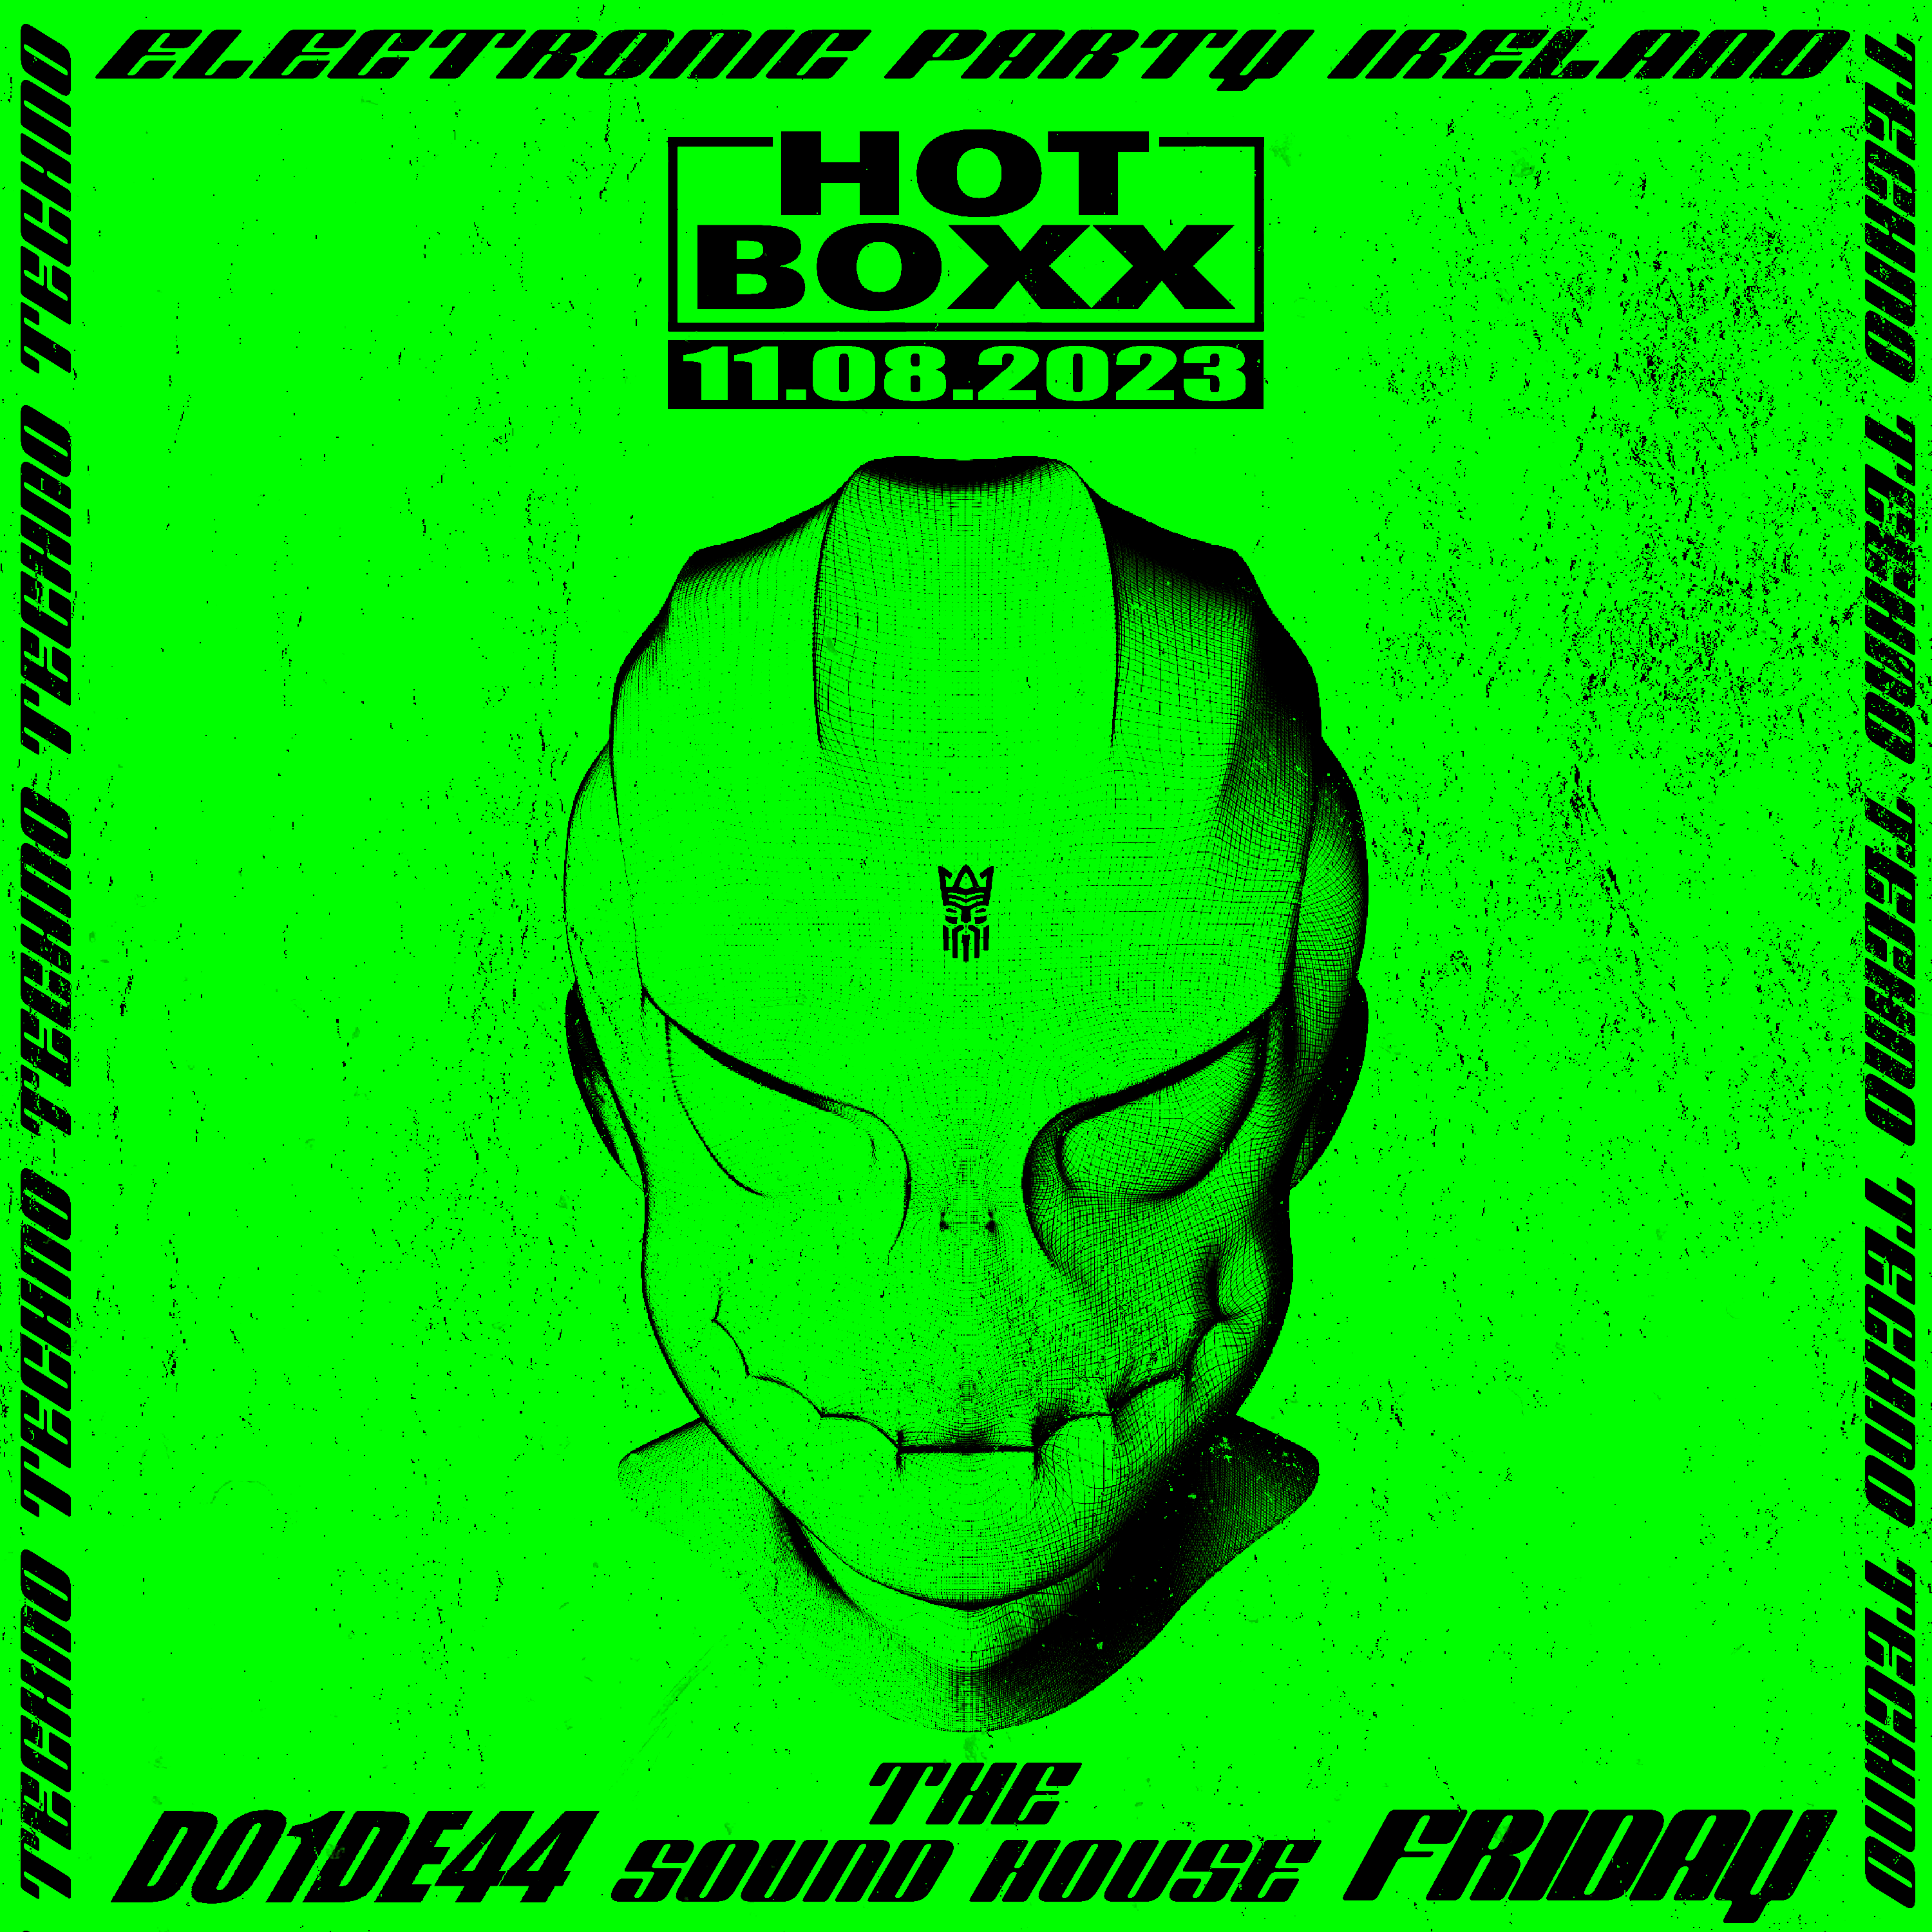 Techno Cage Rave: HOTBOXX - Aug 11th - Página frontal